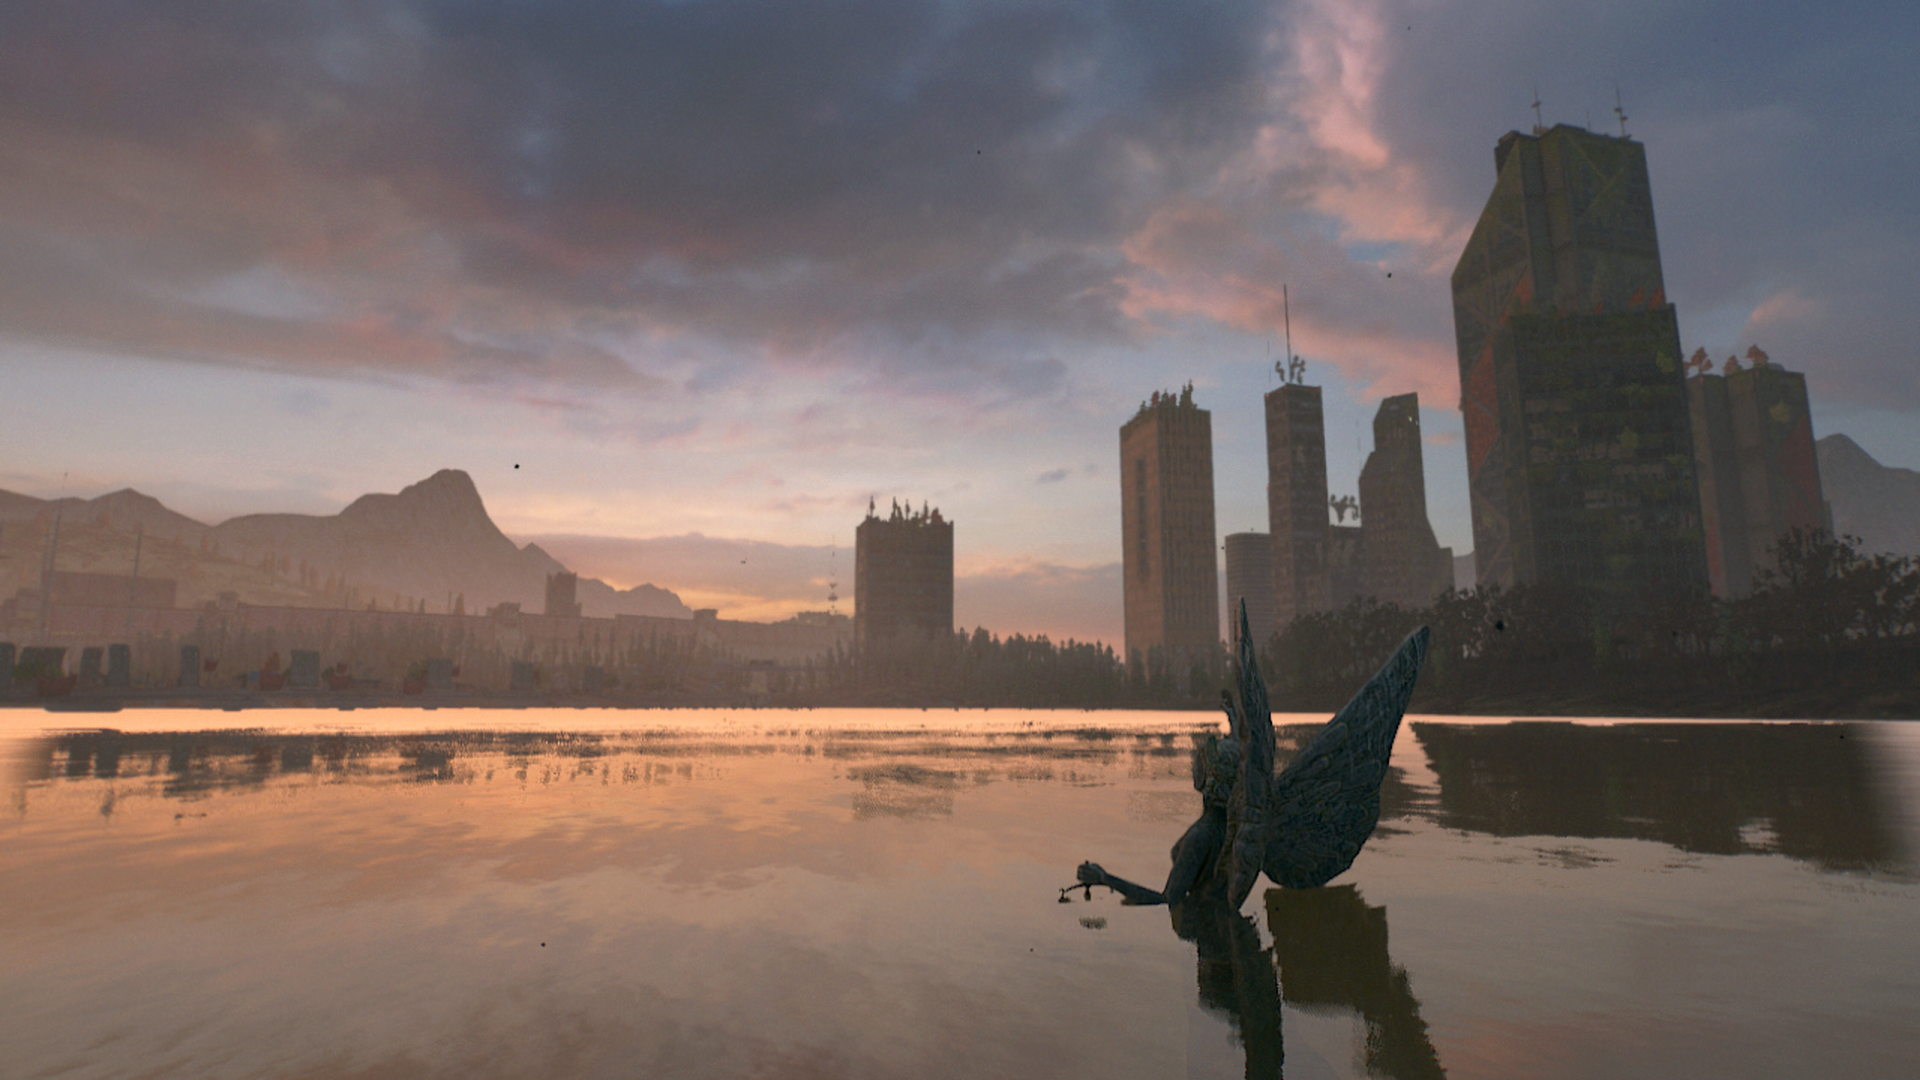 Dying Light Dying Light 2 Stay Human Landscape Apocalyptic Sunset Zombies 1920x1080